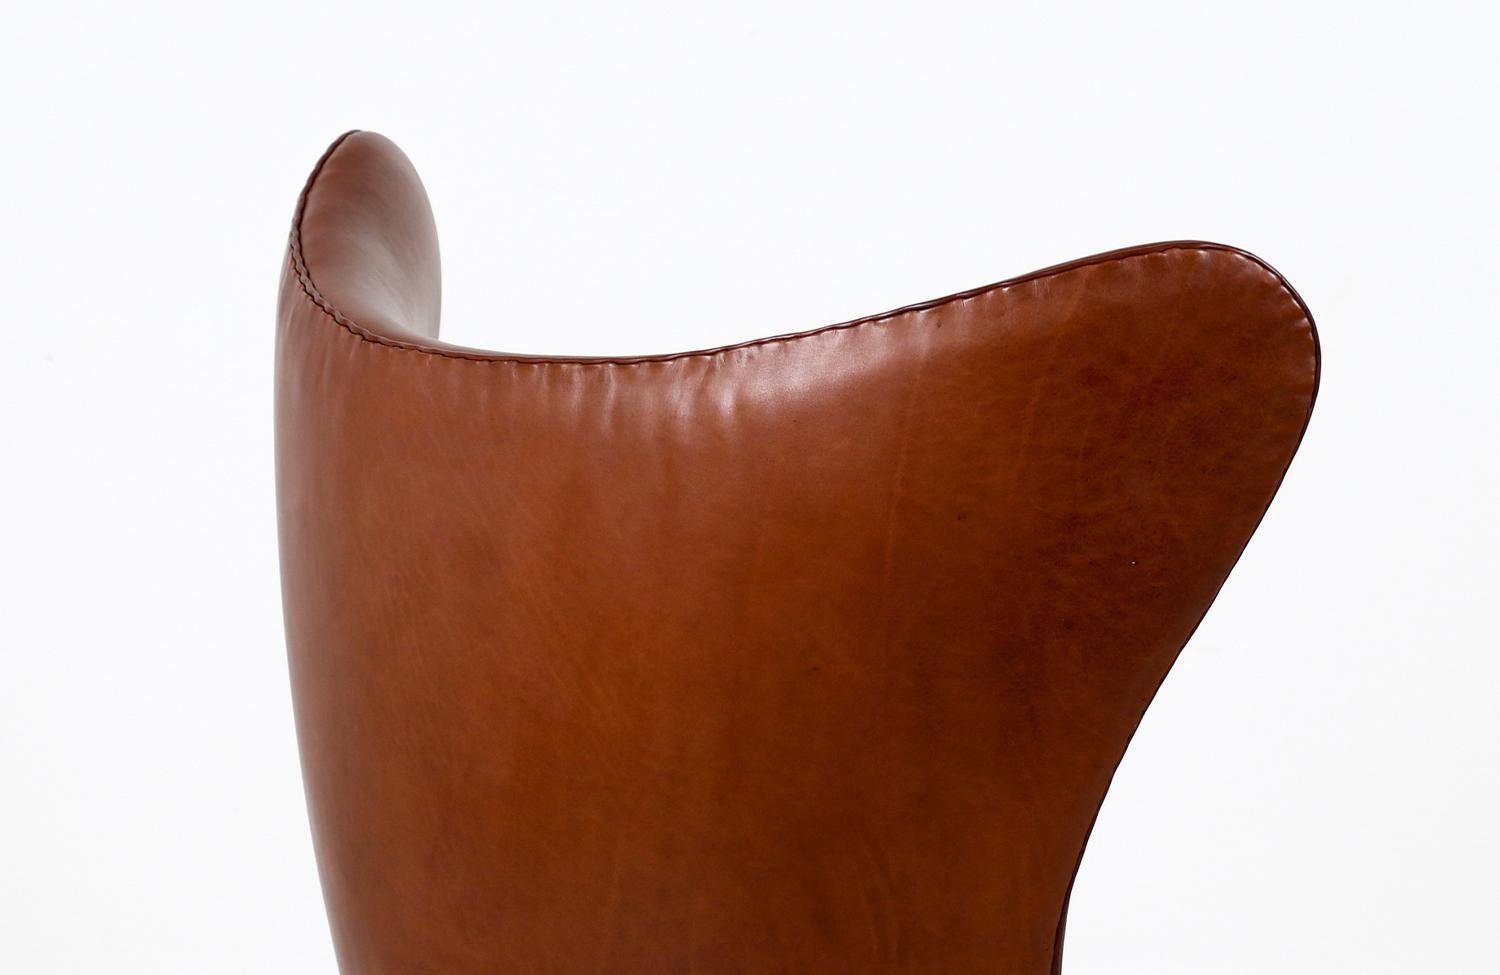 Expertly Restored - Danish Modern Cognac Leather “Egg” Chair by Arne Jacobsen For Sale 3